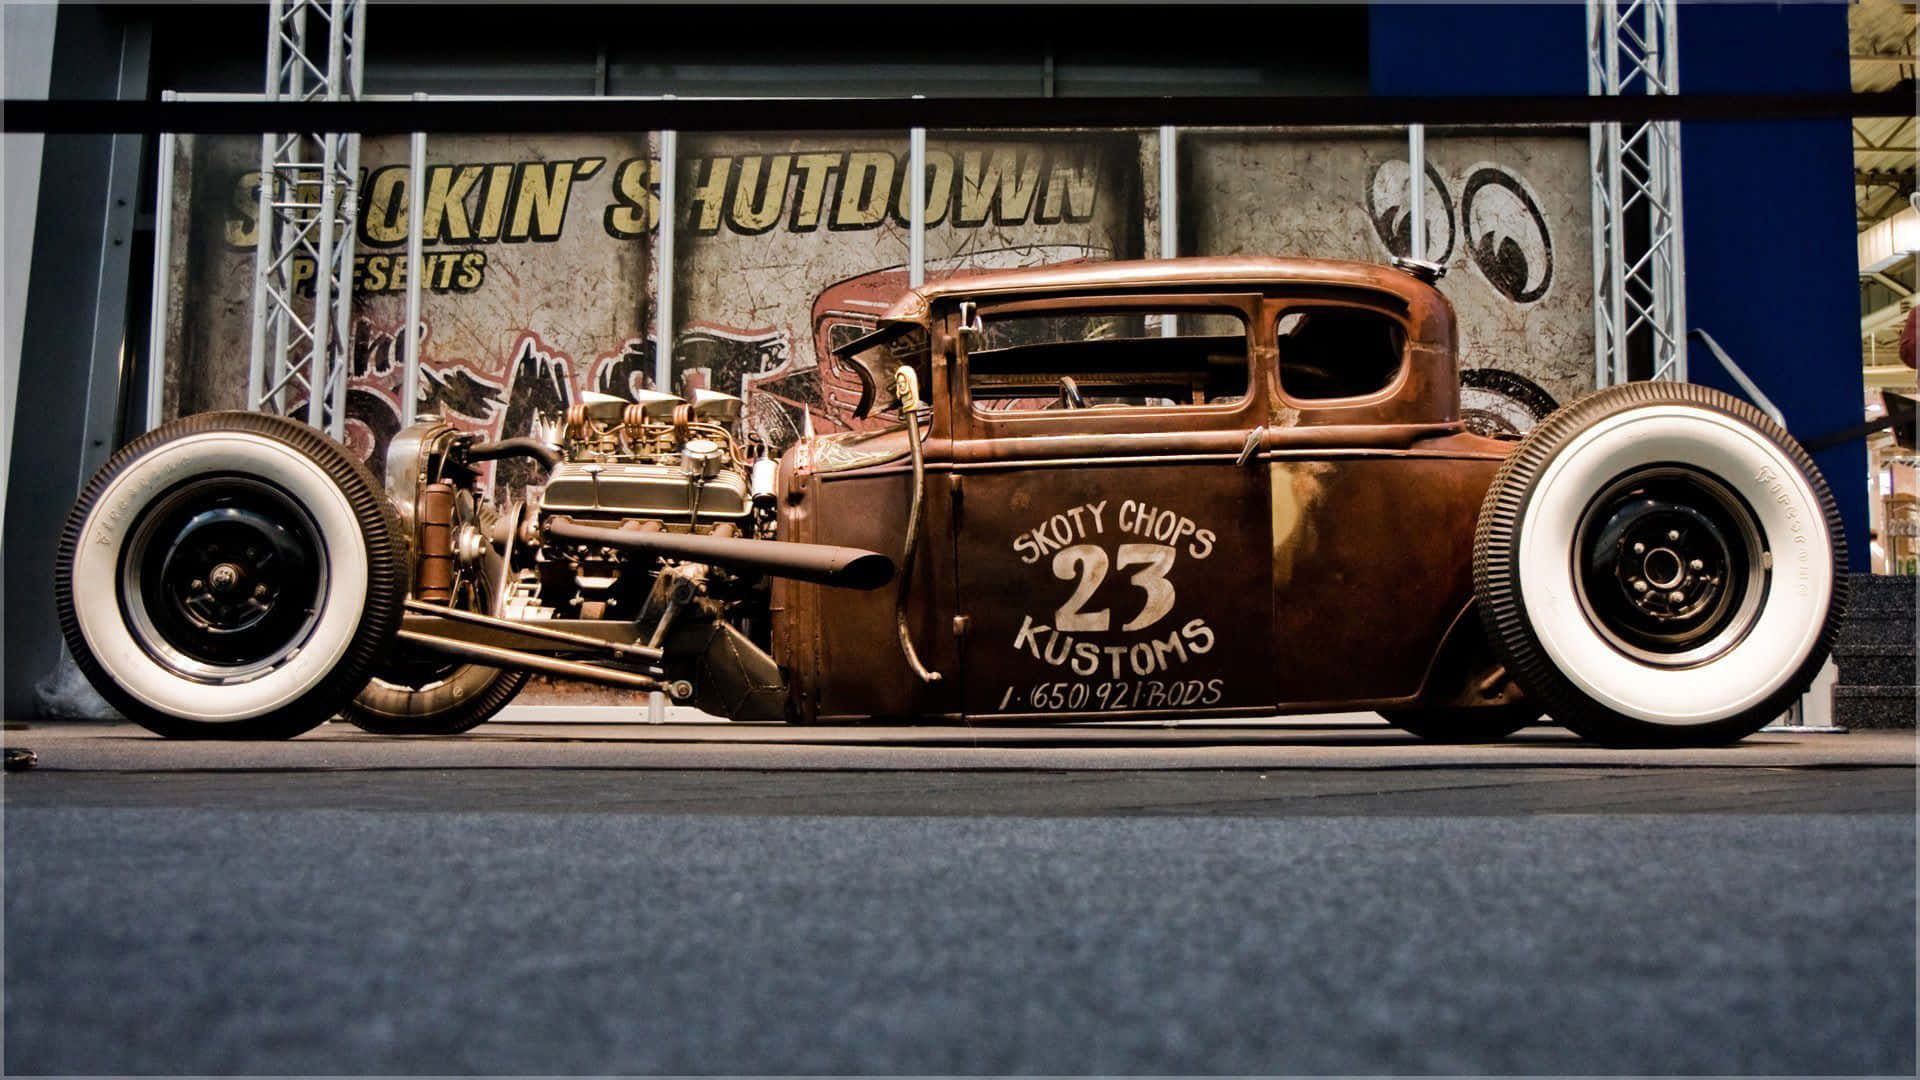 Customize your hot rod with a cool style Wallpaper